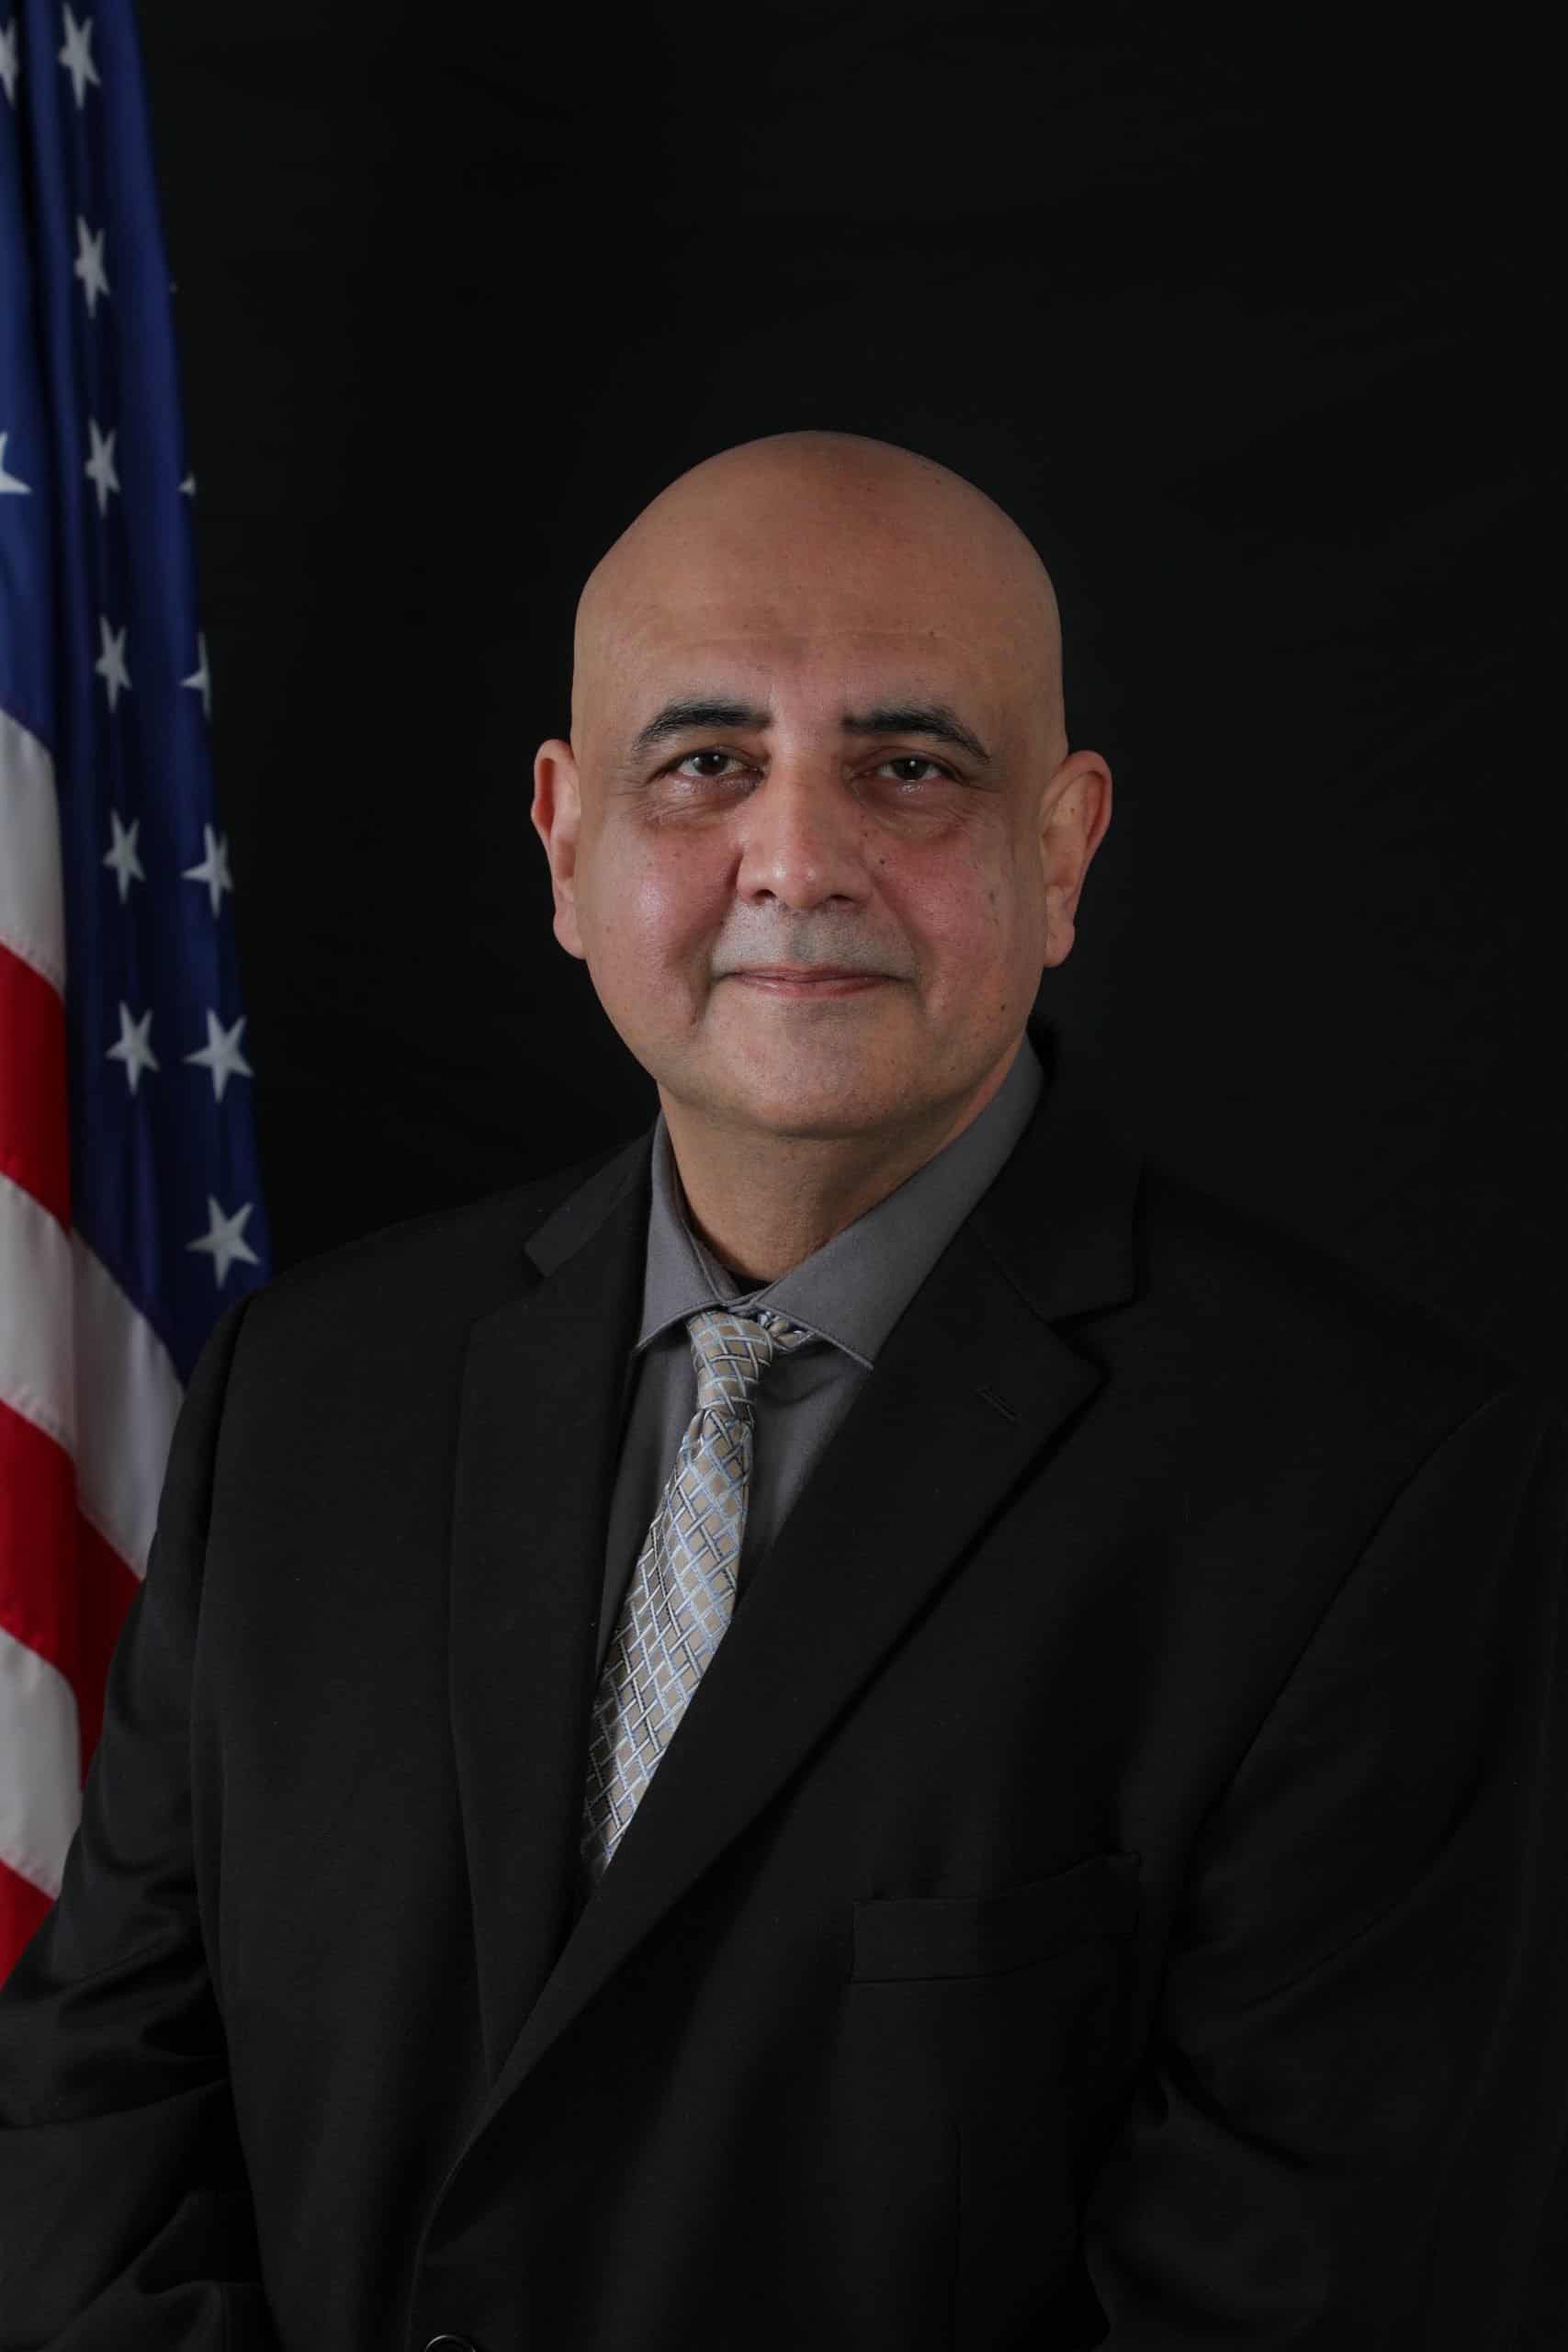 San Joaquin County Sheriff's Office Administrative Services Director Naseem Rehman